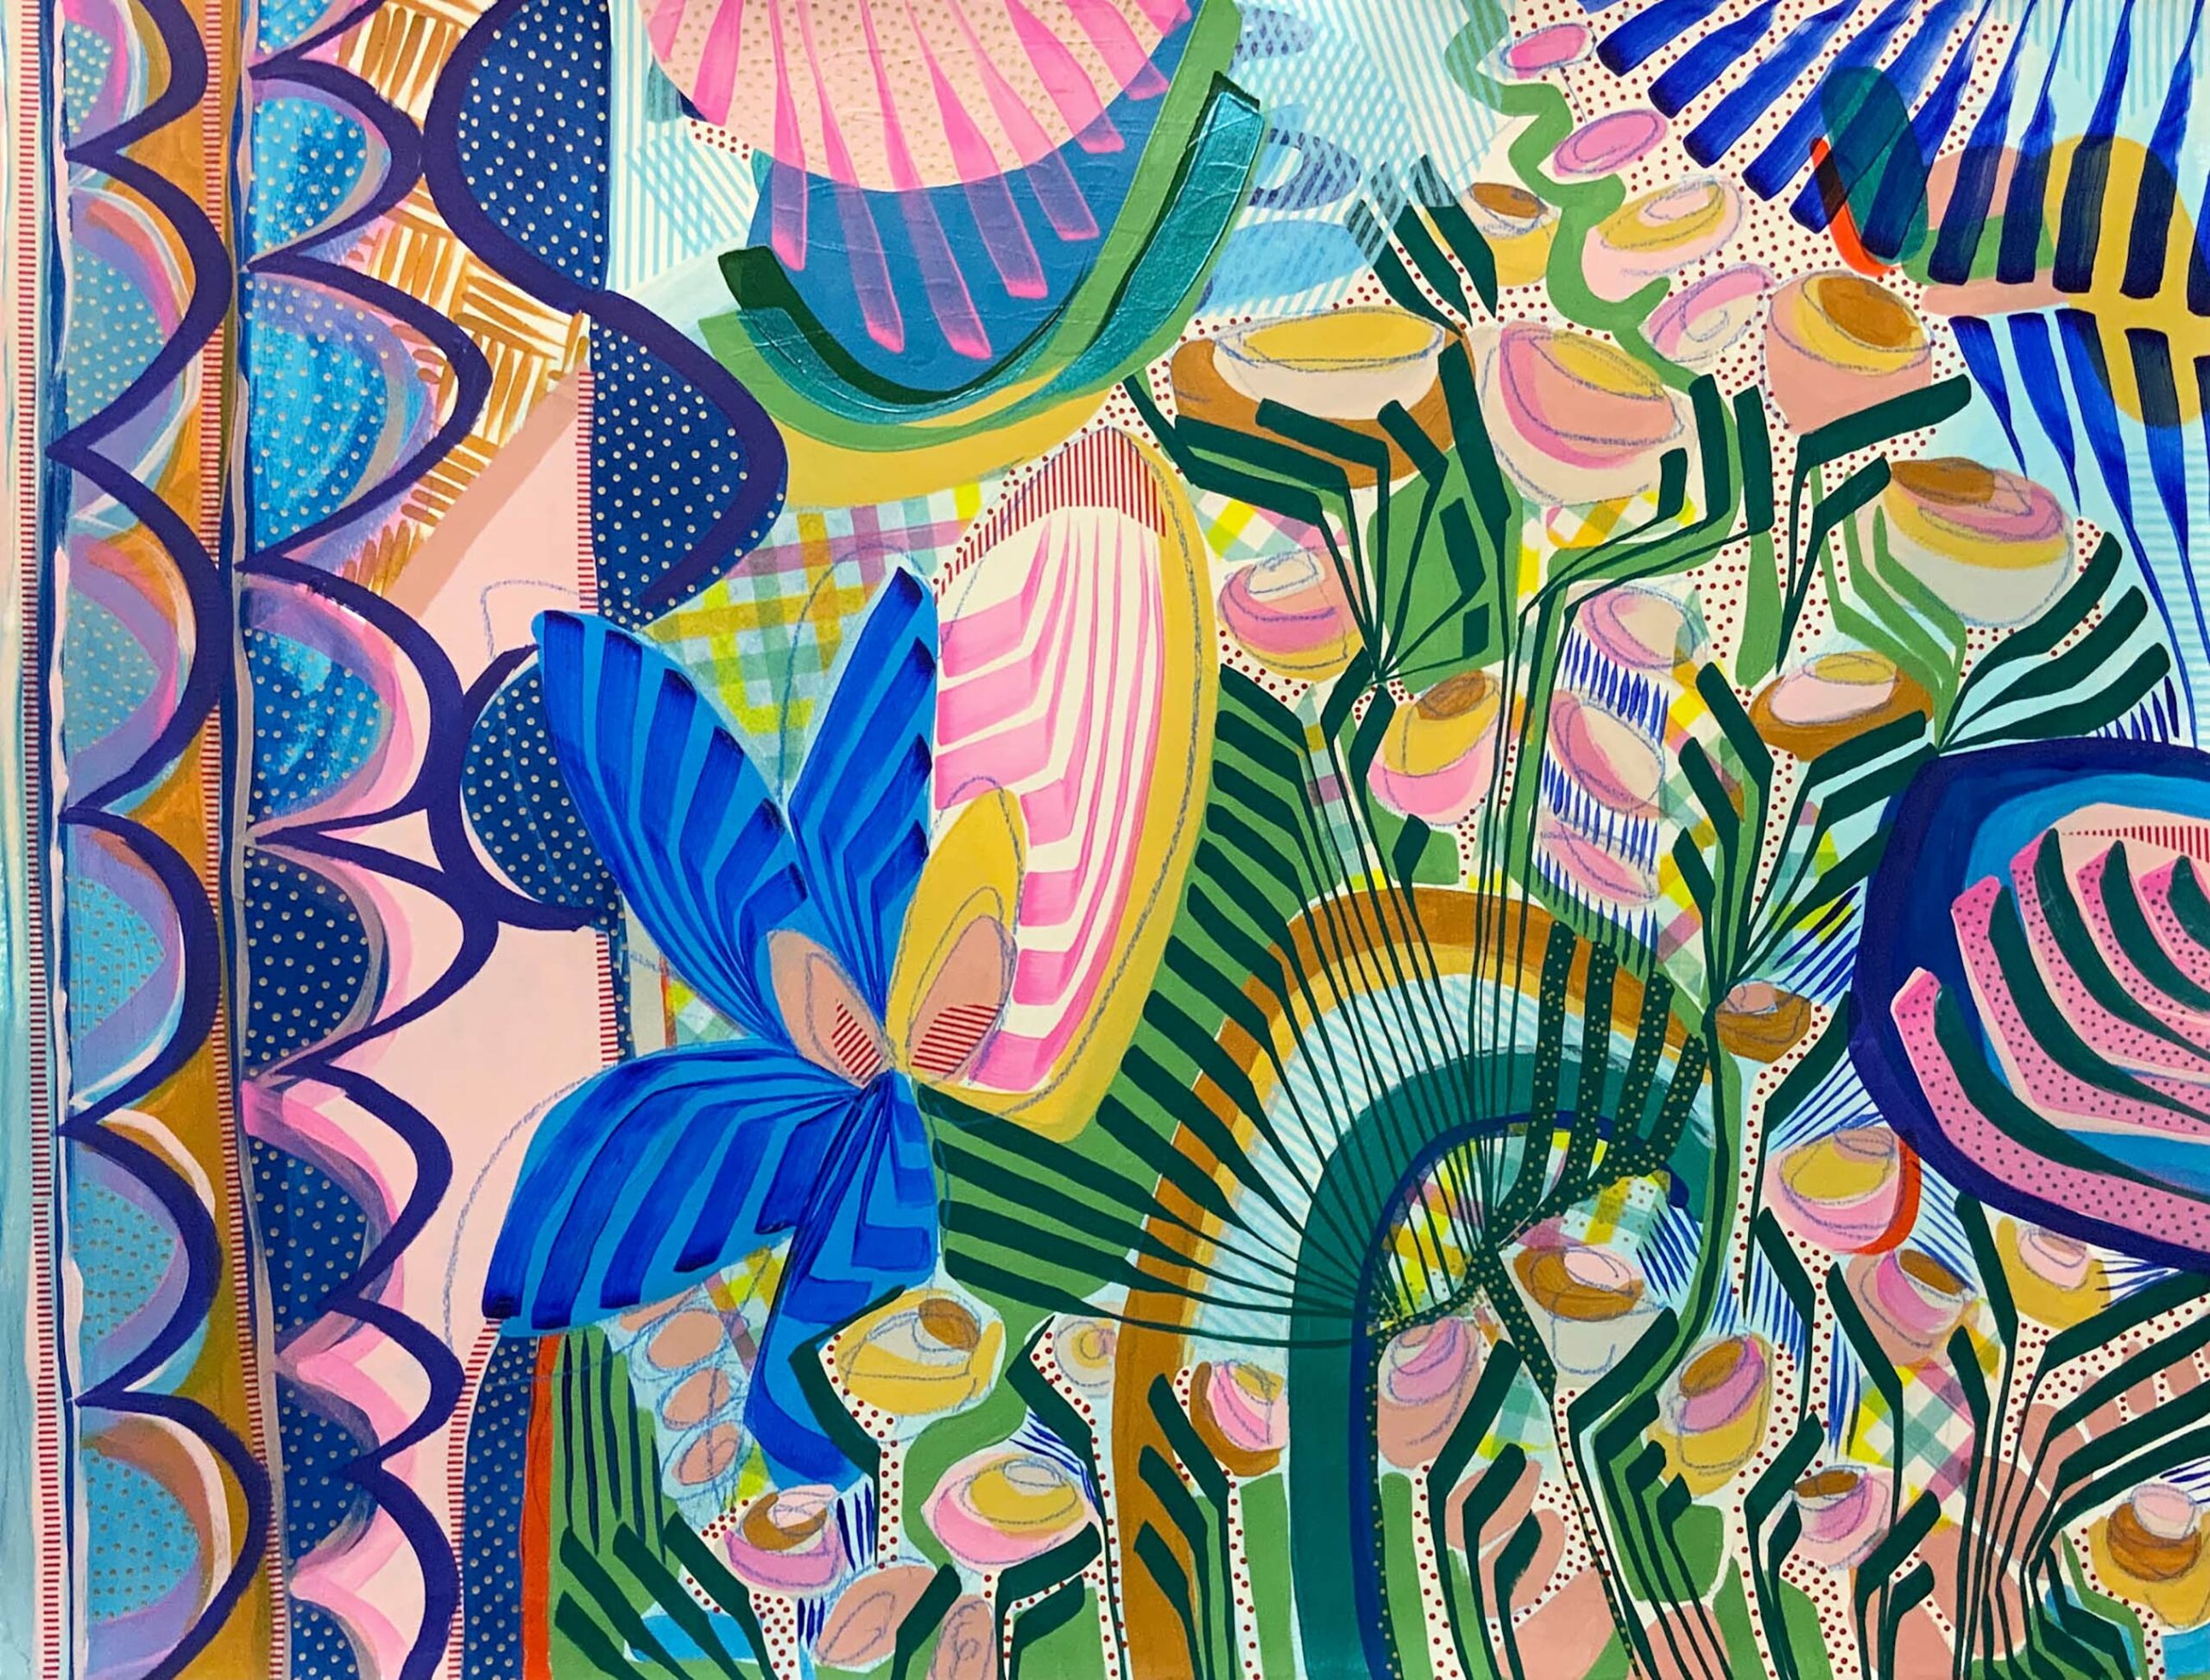 Geometric, abstract floral painting in blues, greens and pinks.